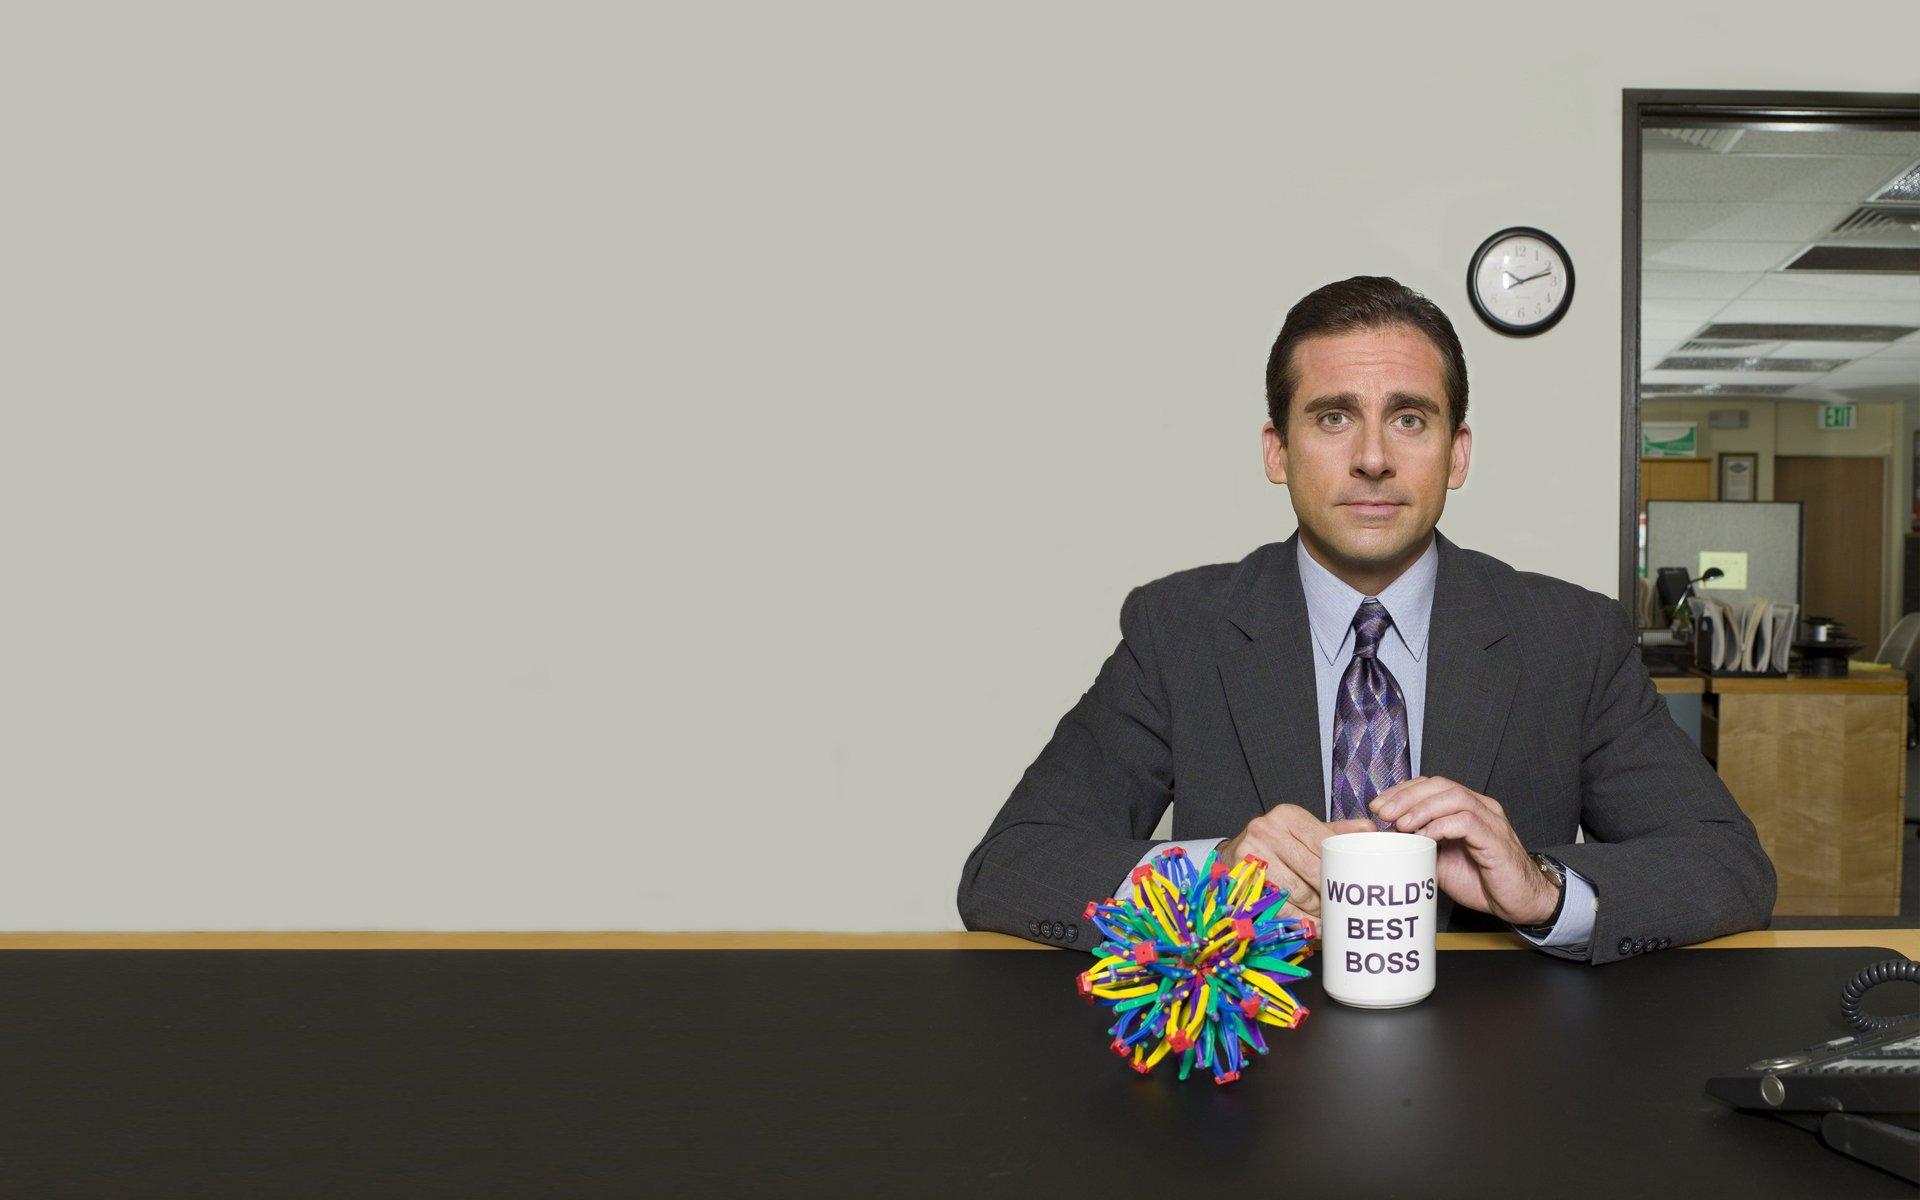 The Office (US) Wallpaper and Background Image